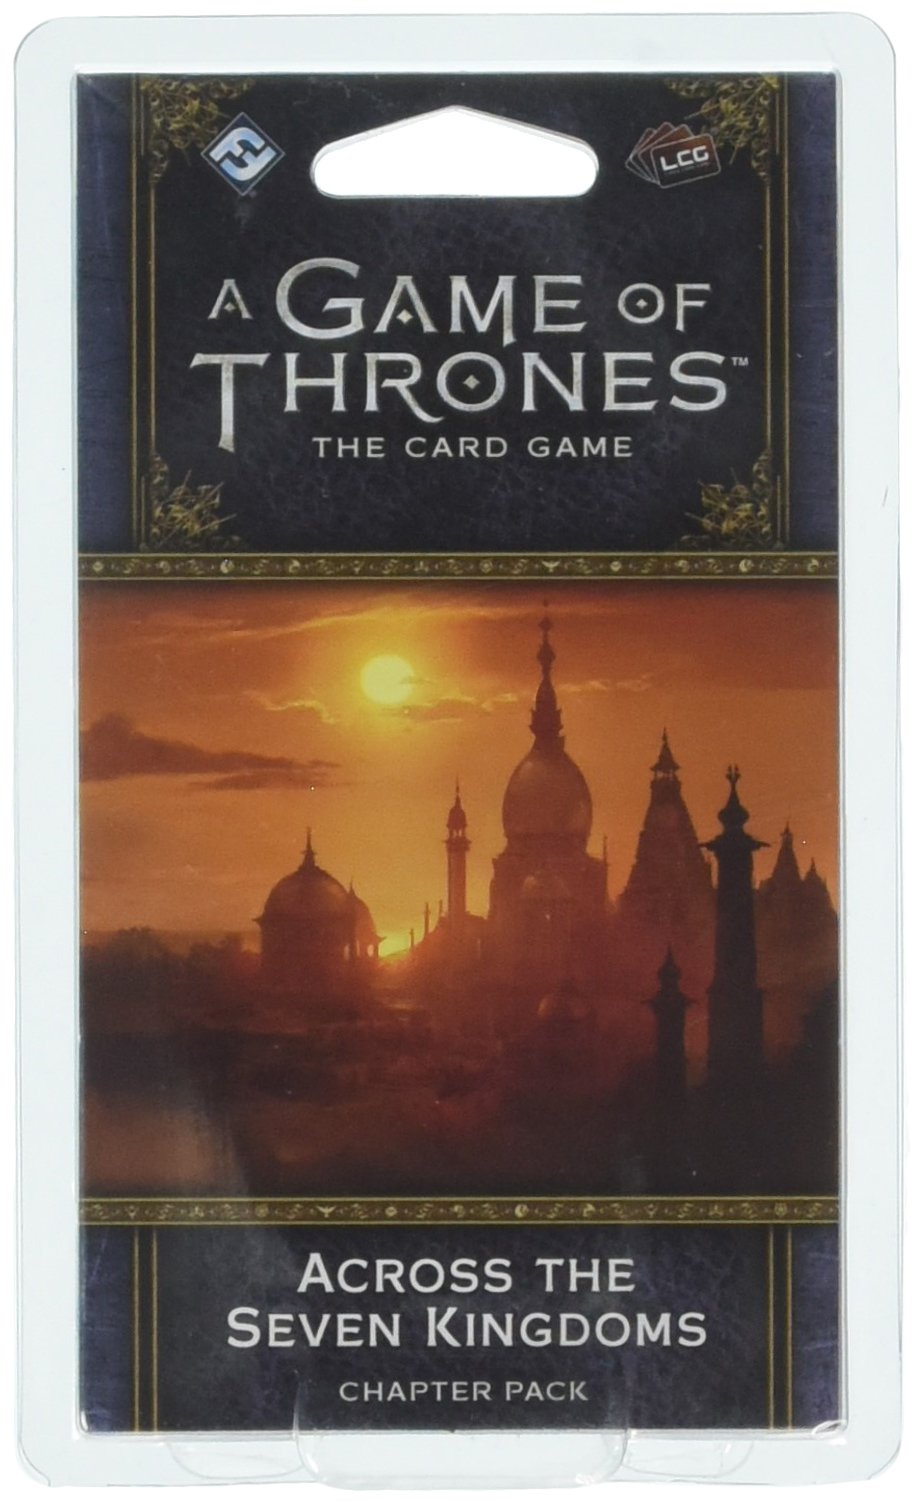 A Game of Thrones LCG Second Edition: Across the Seven Kingdoms